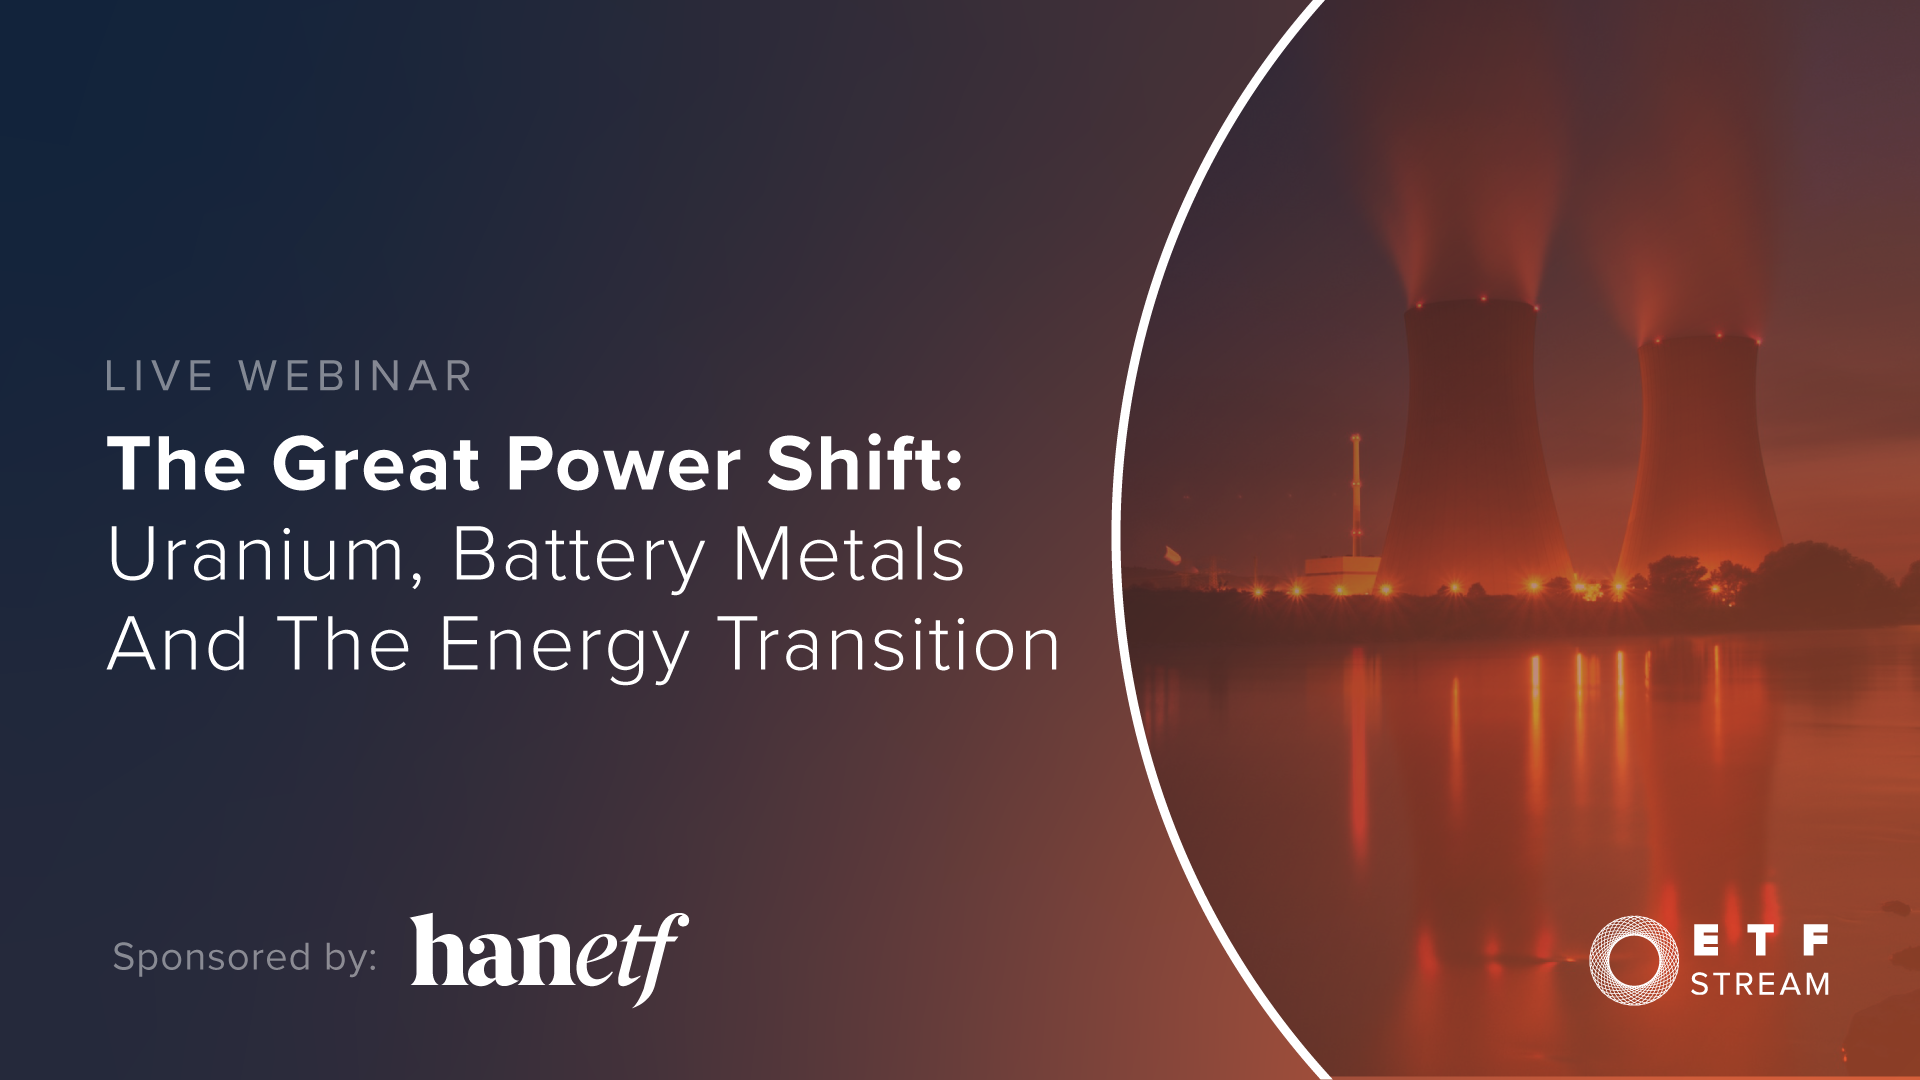 The Great Power Shift: Uranium, Battery Metals And The Energy Transition